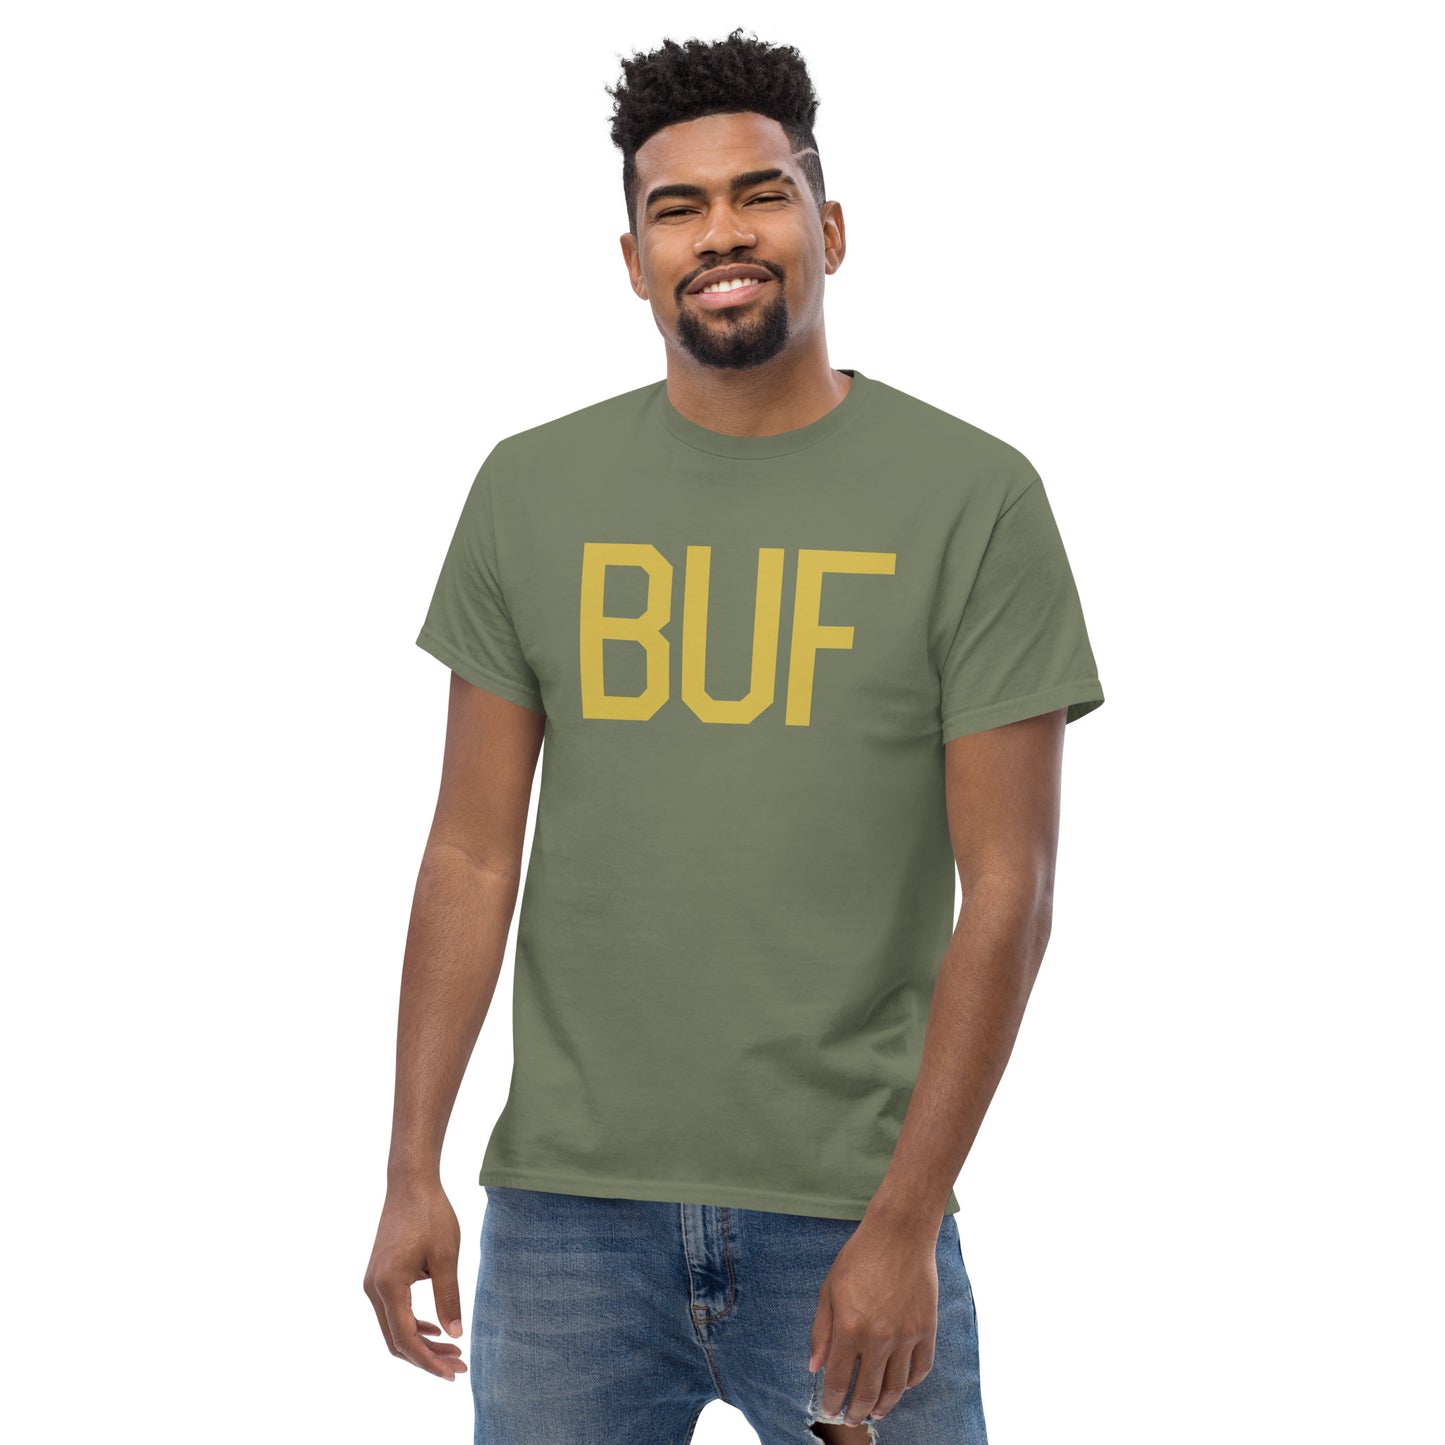 Aviation Enthusiast Men's Tee - Old Gold Graphic • BUF Buffalo • YHM Designs - Image 06